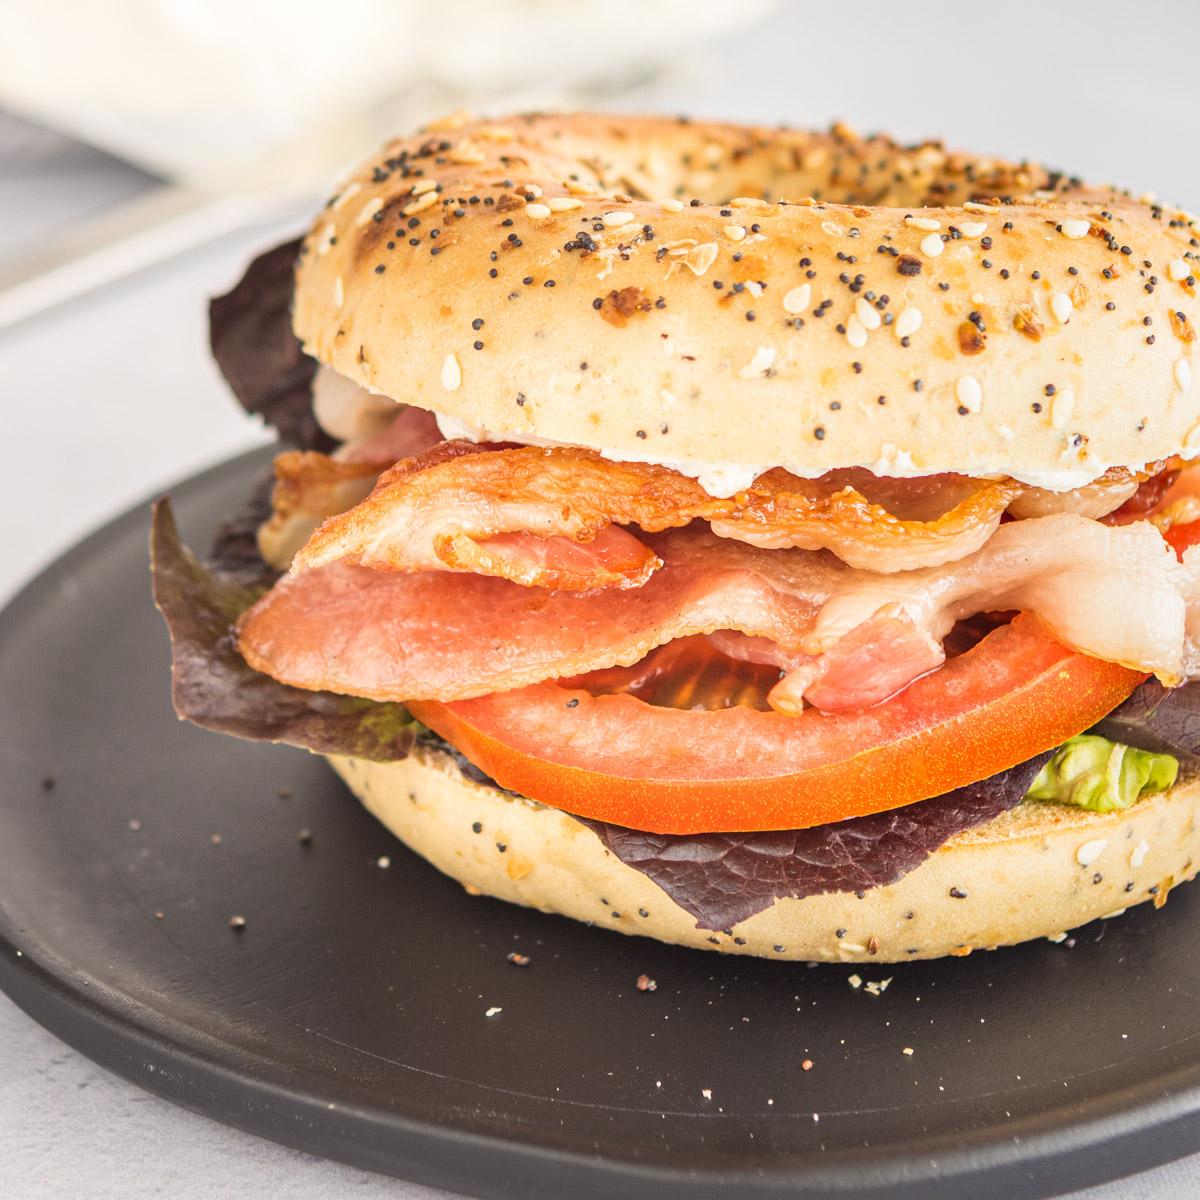 close up of a blt on an everything bagel